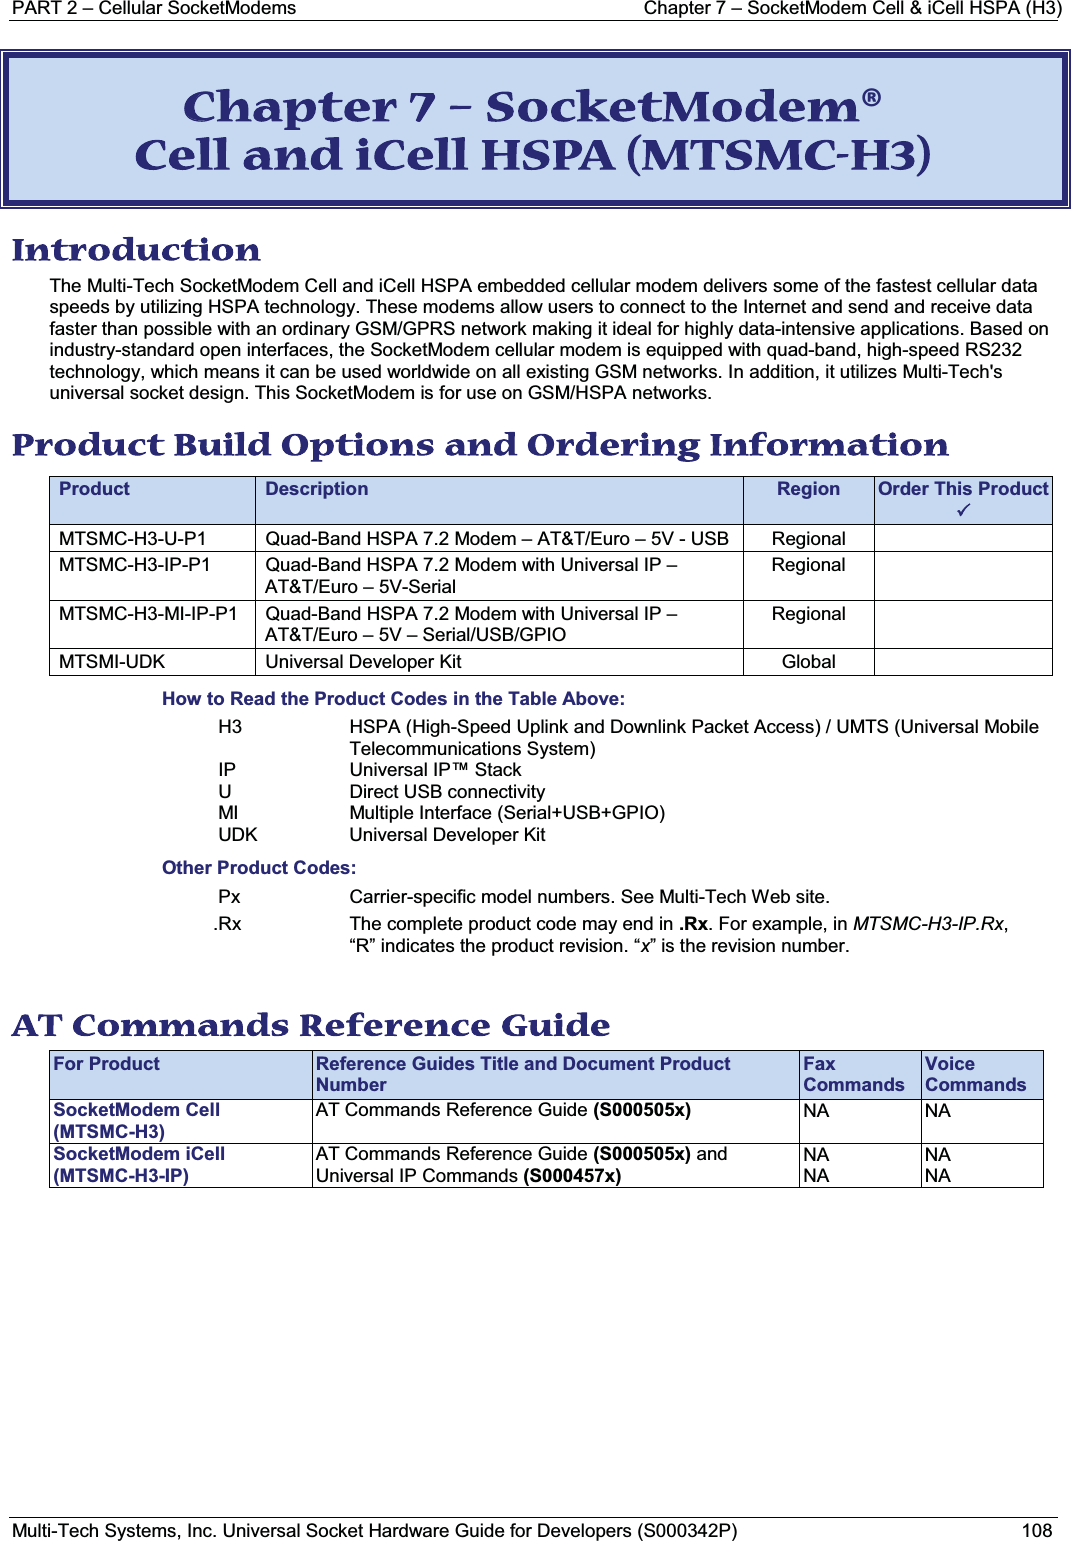 PART 2 – Cellular SocketModems Chapter 7 – SocketModem Cell &amp; iCell HSPA (H3)Multi-Tech Systems, Inc. Universal Socket Hardware Guide for Developers (S000342P) 108CChapter 7 – SocketModem® Cell and iCell HSPA (MTSMC-H3) Introduction The Multi-Tech SocketModem Cell and iCell HSPA embedded cellular modem delivers some of the fastest cellular data speeds by utilizing HSPA technology. These modems allow users to connect to the Internet and send and receive data faster than possible with an ordinary GSM/GPRS network making it ideal for highly data-intensive applications. Based on industry-standard open interfaces, the SocketModem cellular modem is equipped with quad-band, high-speed RS232 technology, which means it can be used worldwide on all existing GSM networks. In addition, it utilizes Multi-Tech&apos;s universal socket design. This SocketModem is for use on GSM/HSPA networks.Product Build Options and Ordering Information Product Description Region Order This Product3 MTSMC-H3-U-P1 Quad-Band HSPA 7.2 Modem – AT&amp;T/Euro – 5V - USB  RegionalMTSMC-H3-IP-P1 Quad-Band HSPA 7.2 Modem with Universal IP –AT&amp;T/Euro – 5V-SerialRegionalMTSMC-H3-MI-IP-P1 Quad-Band HSPA 7.2 Modem with Universal IP –AT&amp;T/Euro – 5V – Serial/USB/GPIORegionalMTSMI-UDK Universal Developer Kit GlobalHow to Read the Product Codes in the Table Above:H3 HSPA (High-Speed Uplink and Downlink Packet Access) / UMTS (Universal Mobile Telecommunications System)IP Universal IP™ StackU Direct USB connectivityMI Multiple Interface (Serial+USB+GPIO)UDK Universal Developer KitOther Product Codes:Px Carrier-specific model numbers. See Multi-Tech Web site..Rx The complete product code may end in .Rx. For example, in MTSMC-H3-IP.Rx,“R” indicates the product revision. “x” is the revision number.AT Commands Reference Guide For Product Reference Guides Title and Document Product NumberFax CommandsVoice CommandsSocketModem Cell(MTSMC-H3)AT Commands Reference Guide (S000505x) NA NASocketModem iCell(MTSMC-H3-IP)AT Commands Reference Guide (S000505x) andUniversal IP Commands (S000457x)NANANANA